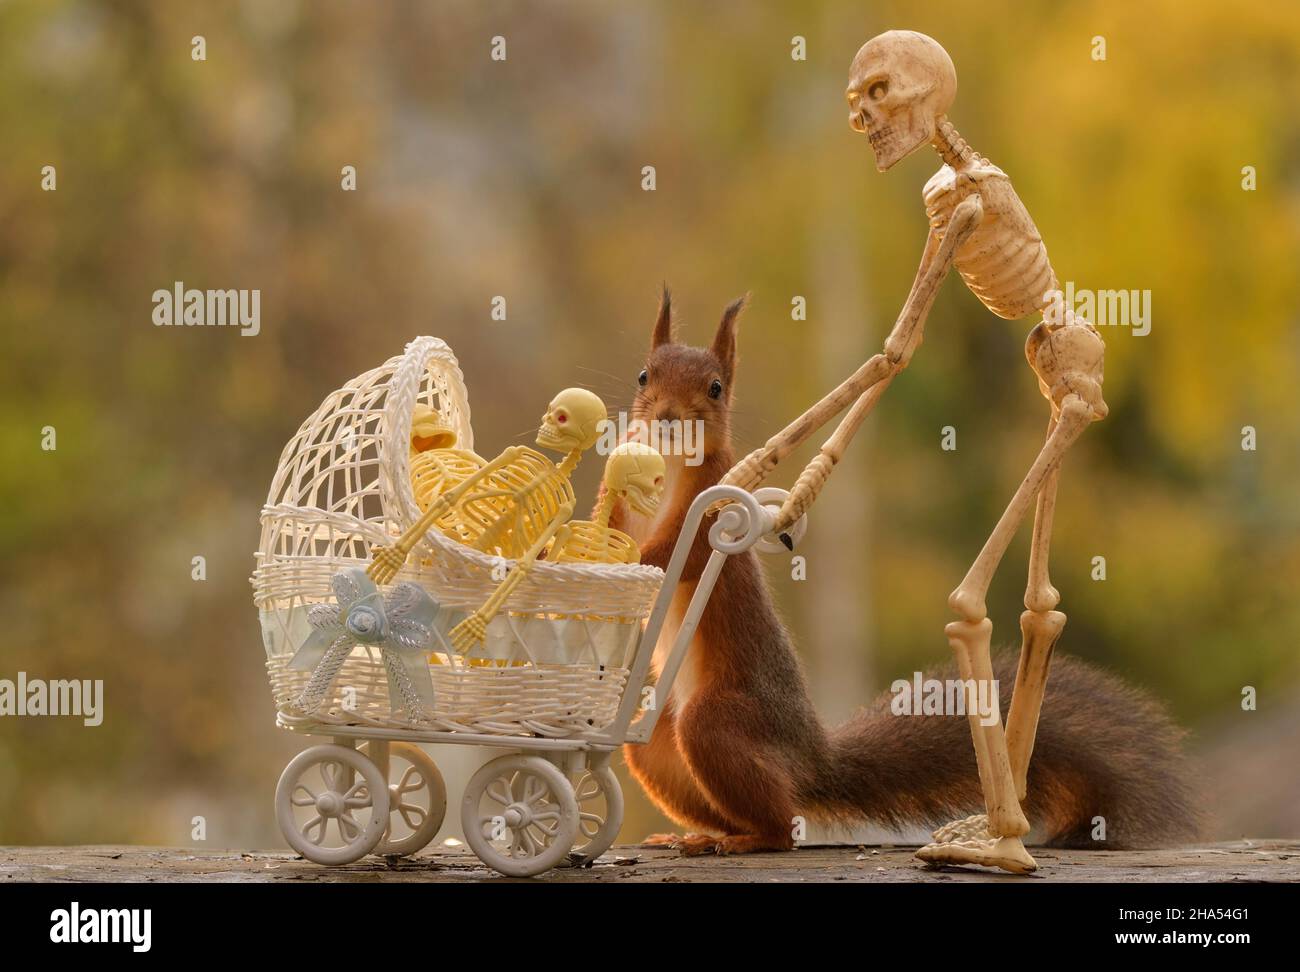 red squirrel is standing behind a stroller with an skeleton Stock Photo